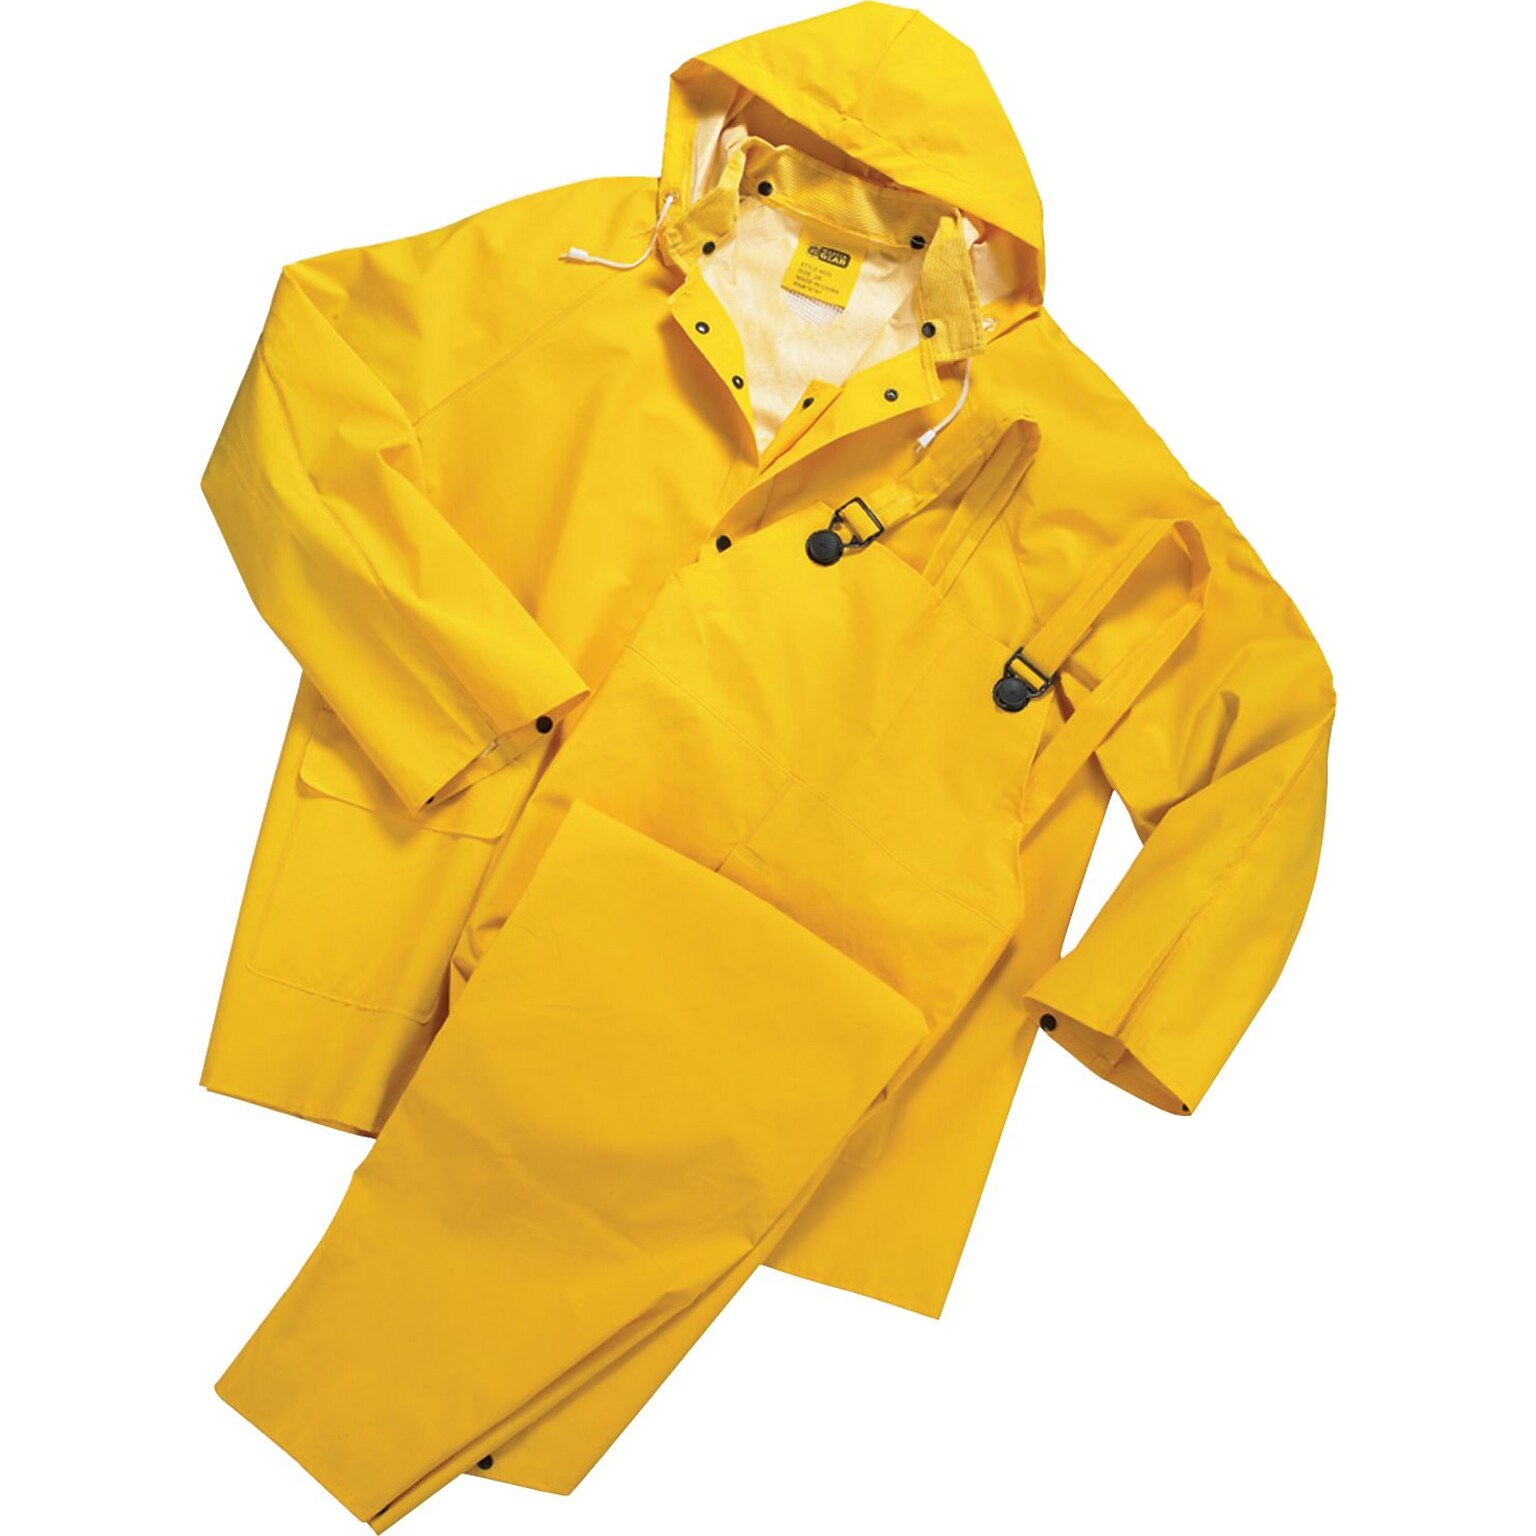 Anchor Brand Rainsuits, PVC/Polyester, XL Size, Front Closure, Yellow